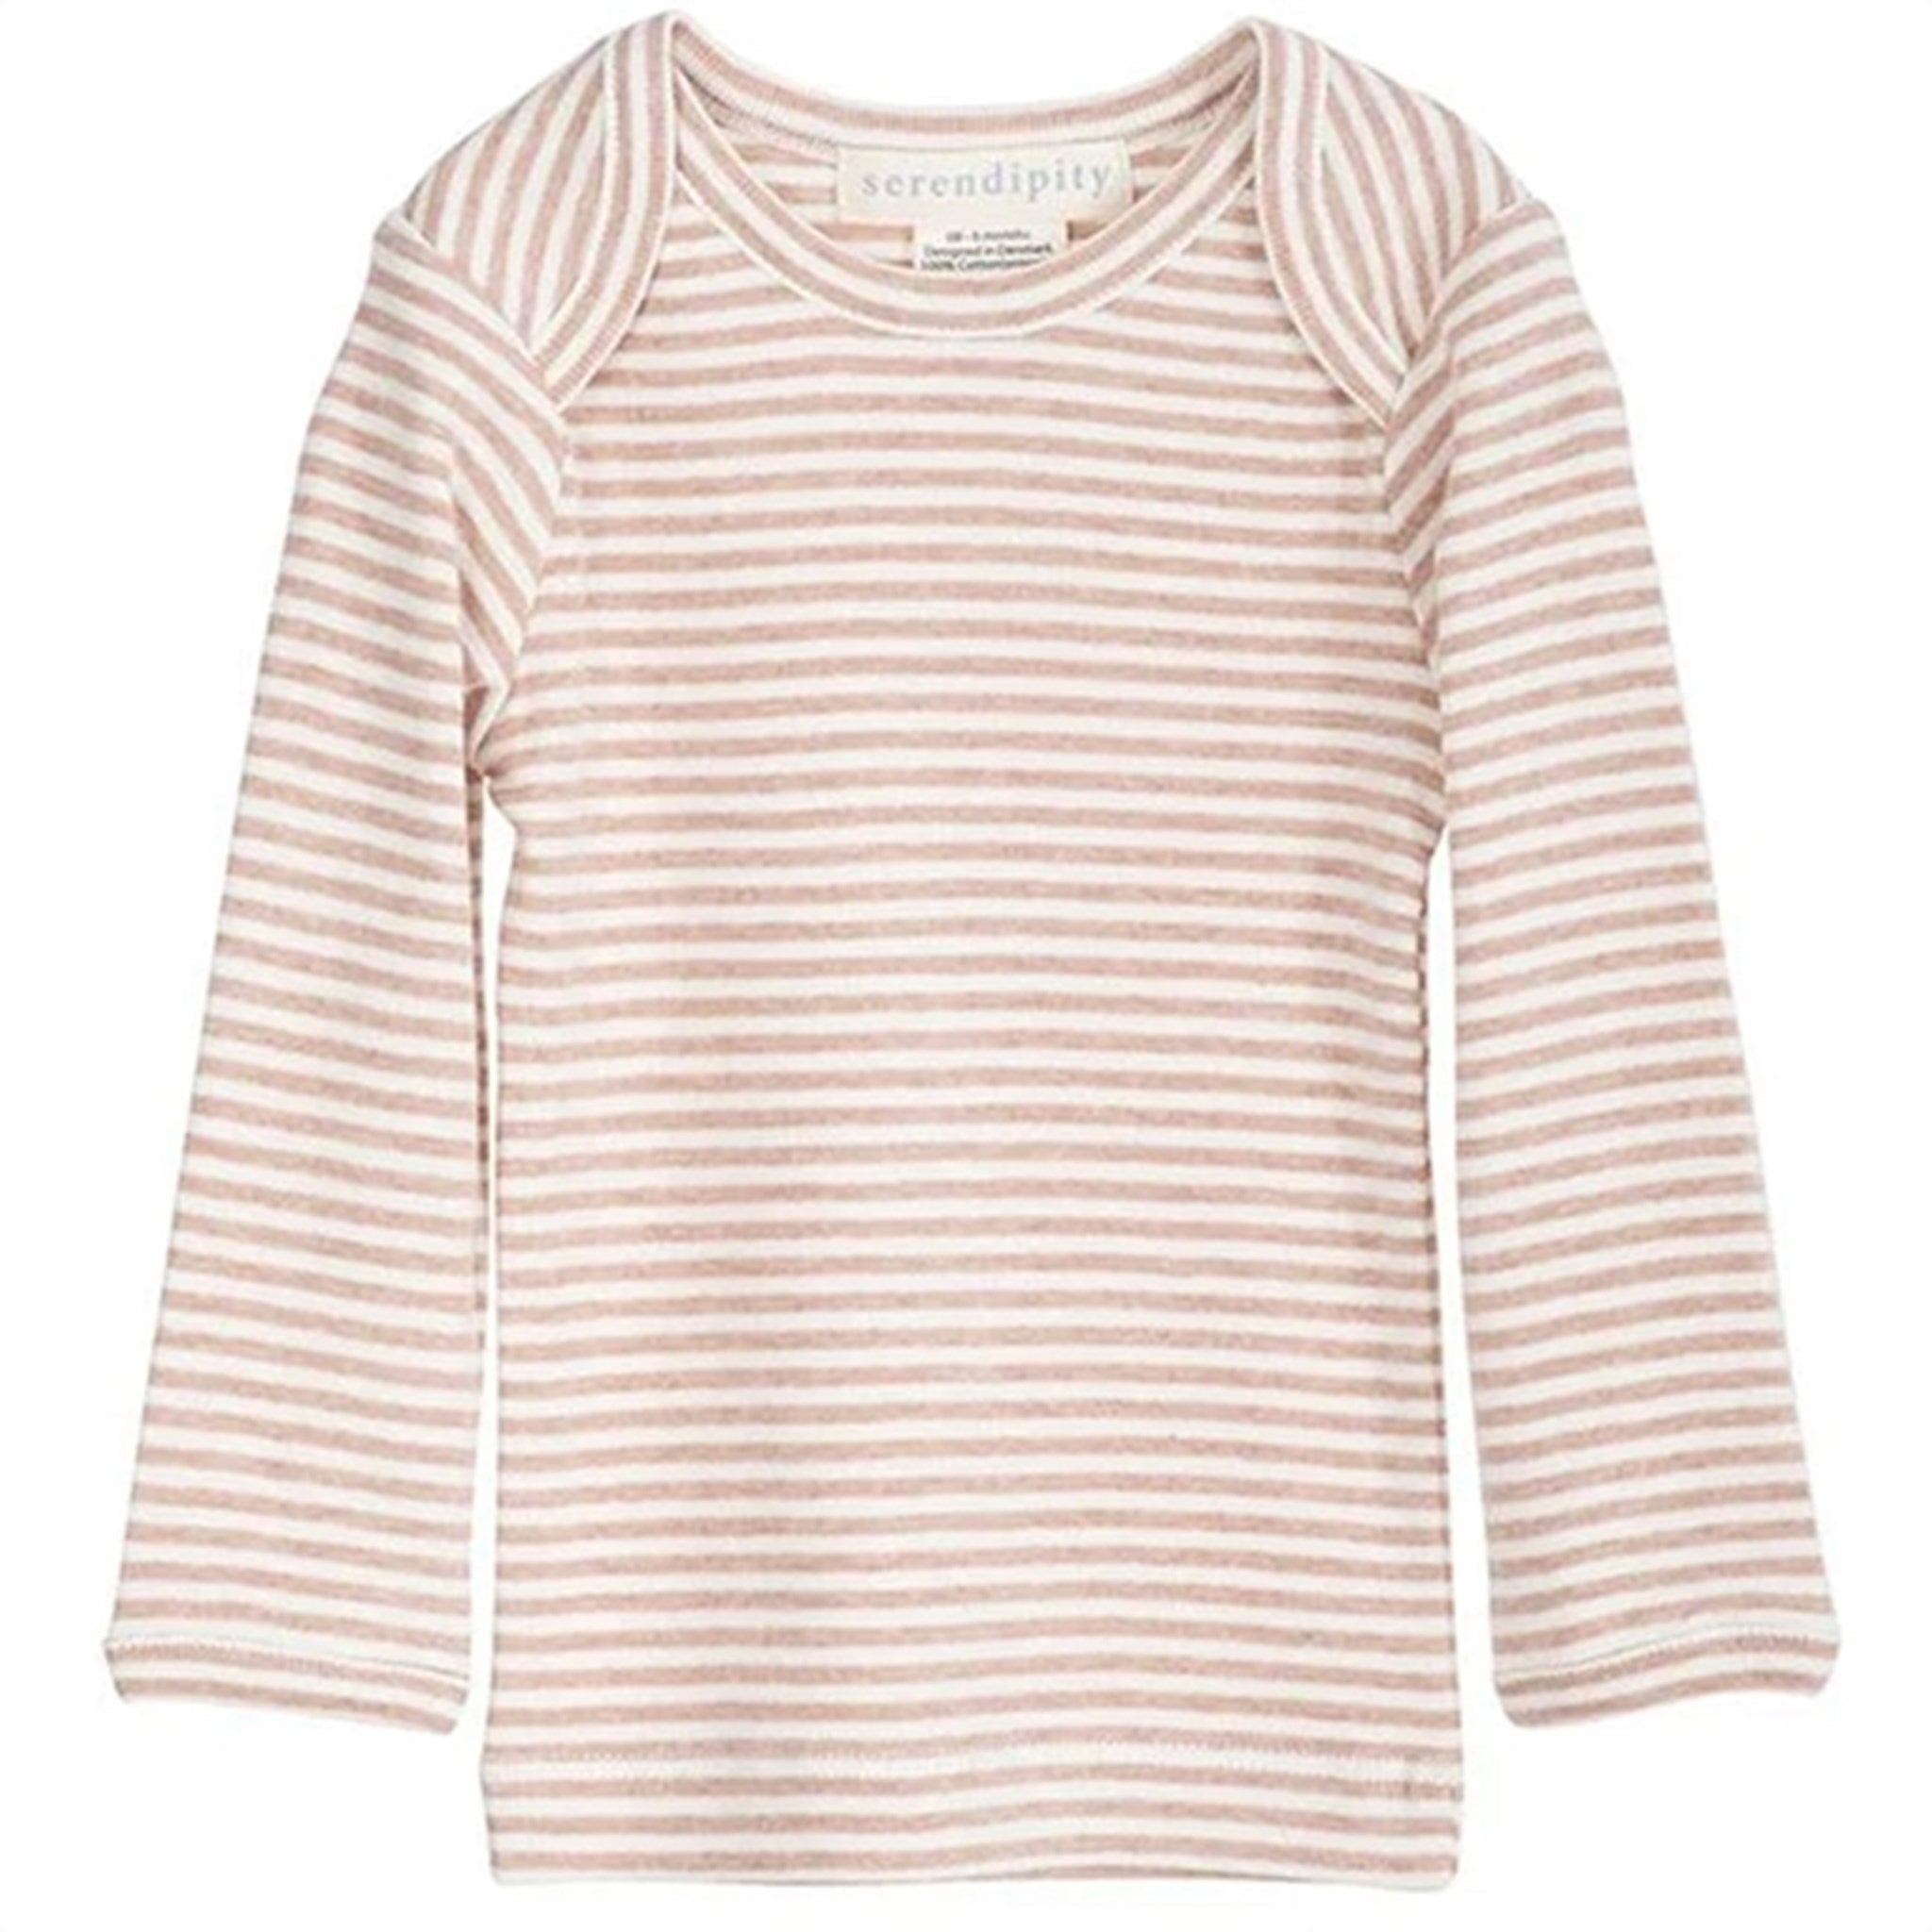 Serendipity Clay/Offwhite Rib Baby Tee Stripe Blouse